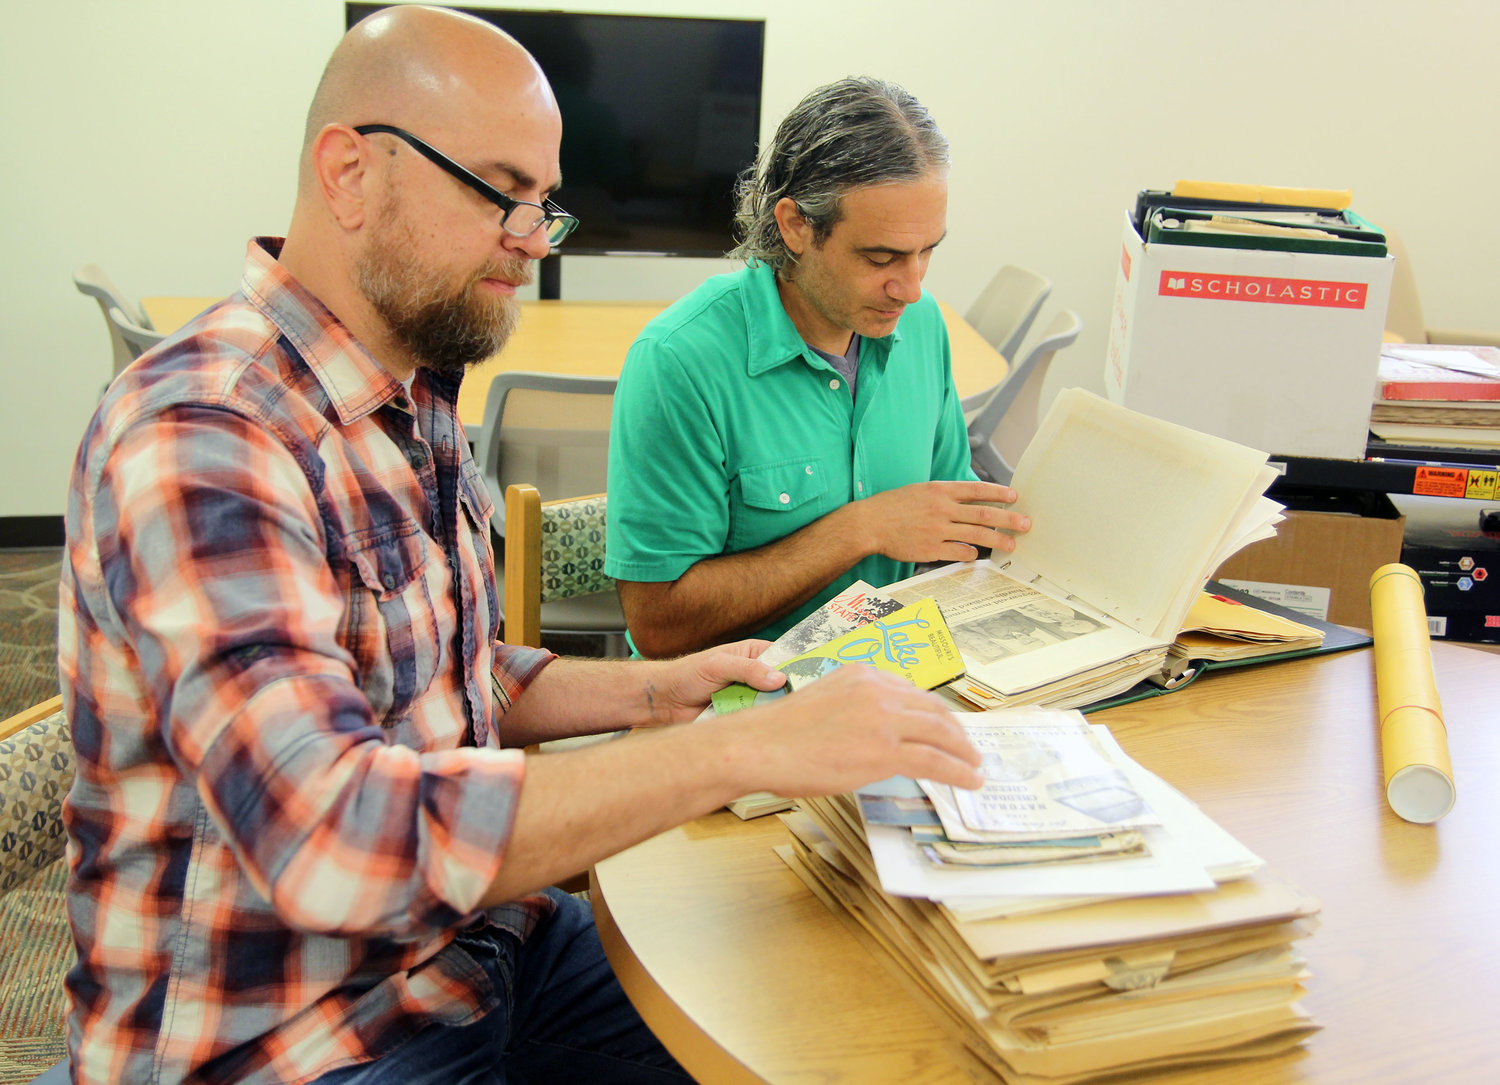 MISSOURI STATE UNIVERSITY-WEST PLAINS (MSU-WP) faculty members Frank Priest, left, and Dr. Jason McCollom look through old brochures and newspaper clippings to determine if they meet the criteria for inclusion in the new Ozarks Heritage Resource Center at the Garnett Library.